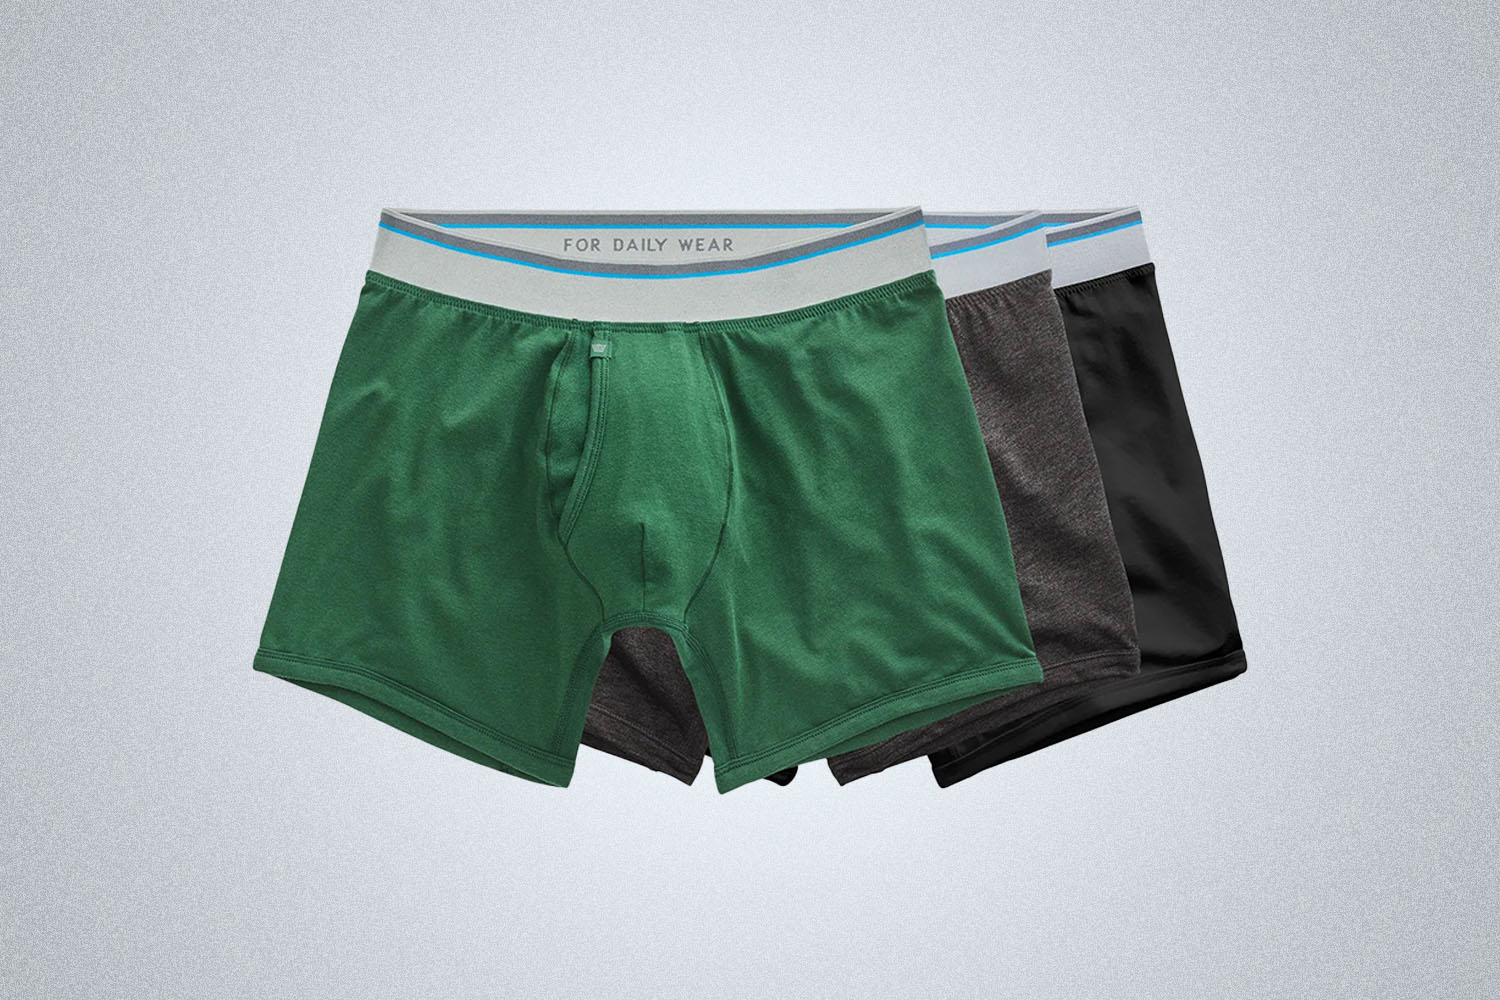 three pairs of underwear overlayed from Mack Weldon on a grey background